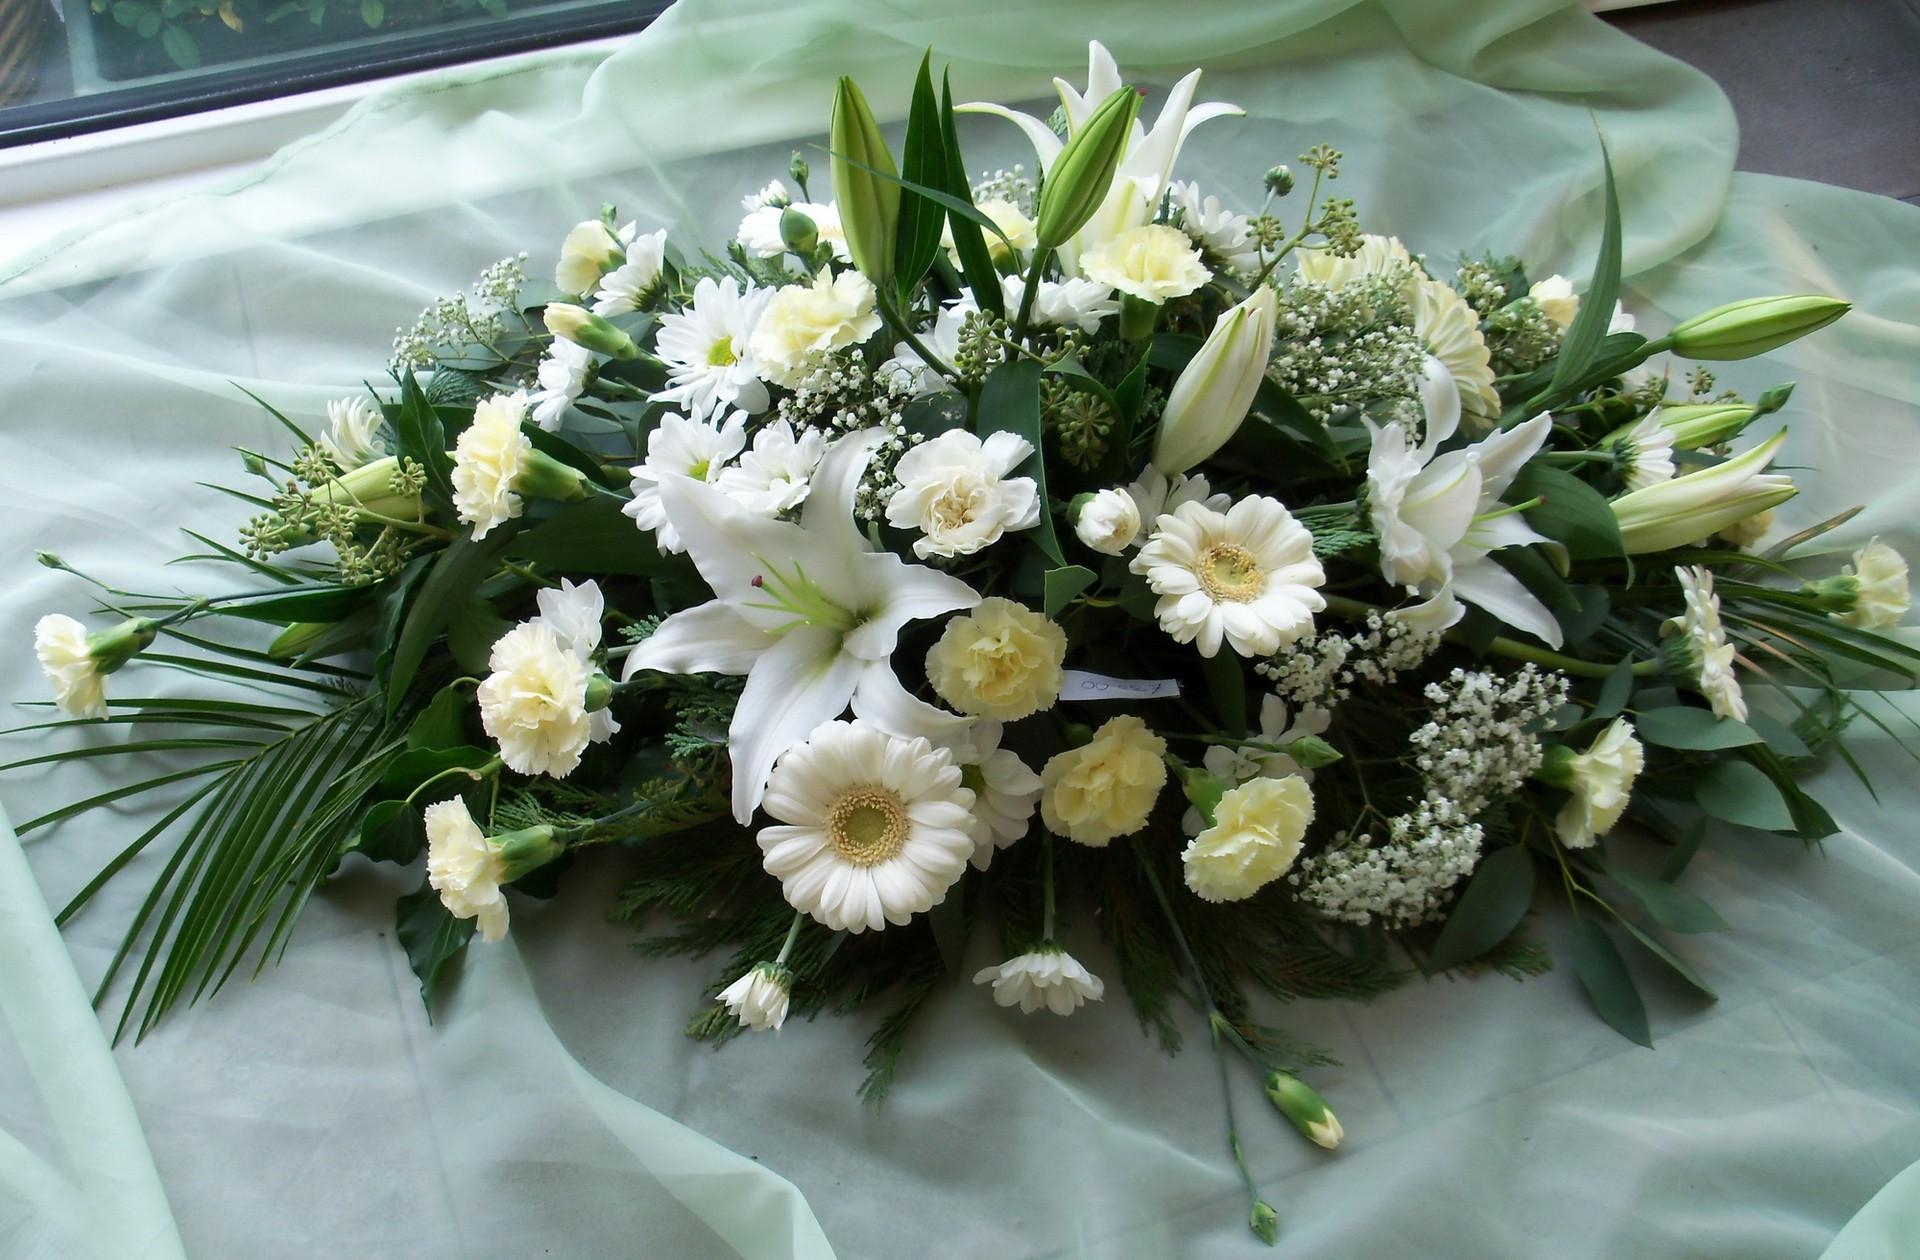 lilies, carnations, handsomely, gypsophilus, flowers, gerberas, gipsophile, composition, it's beautiful